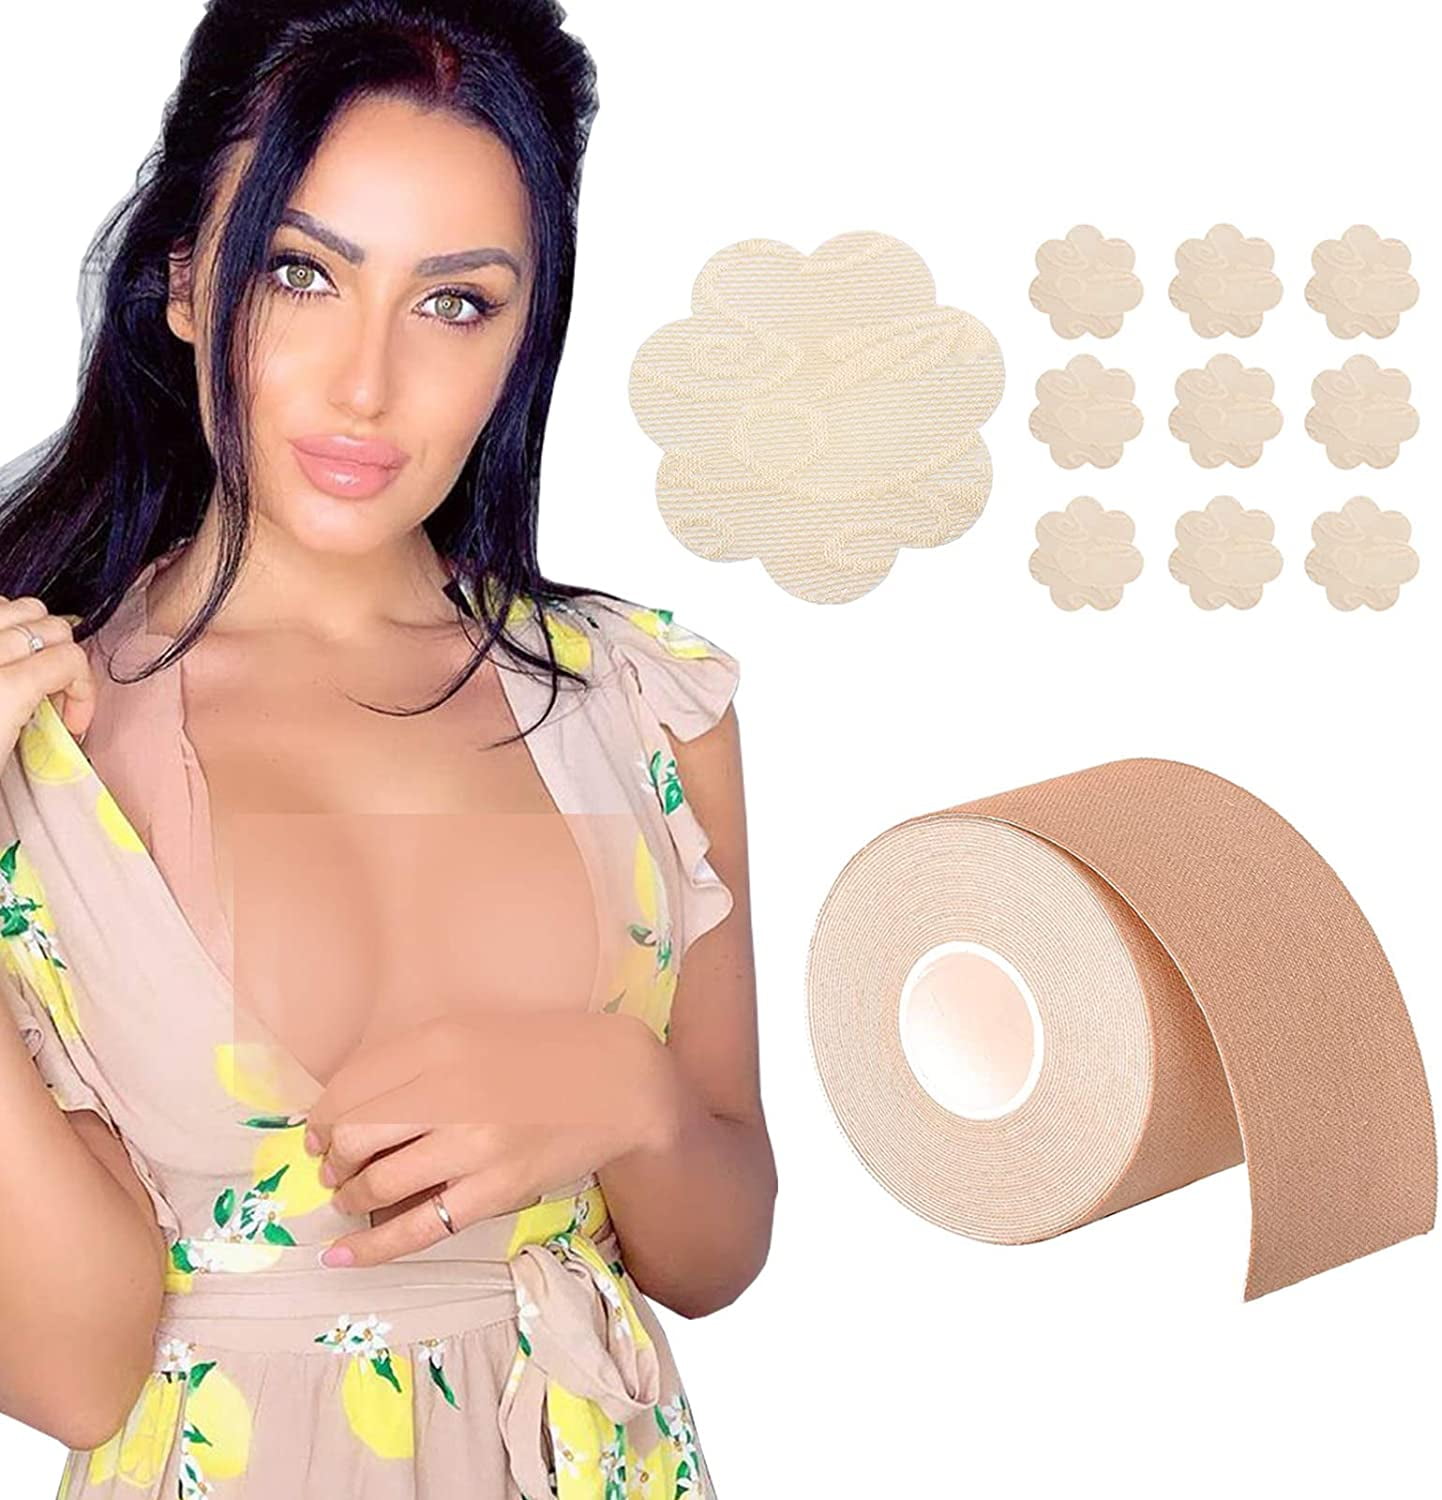 Boob Tape Breast Lift Tape Adhesive Bra Nipple Cover,A-G Cup